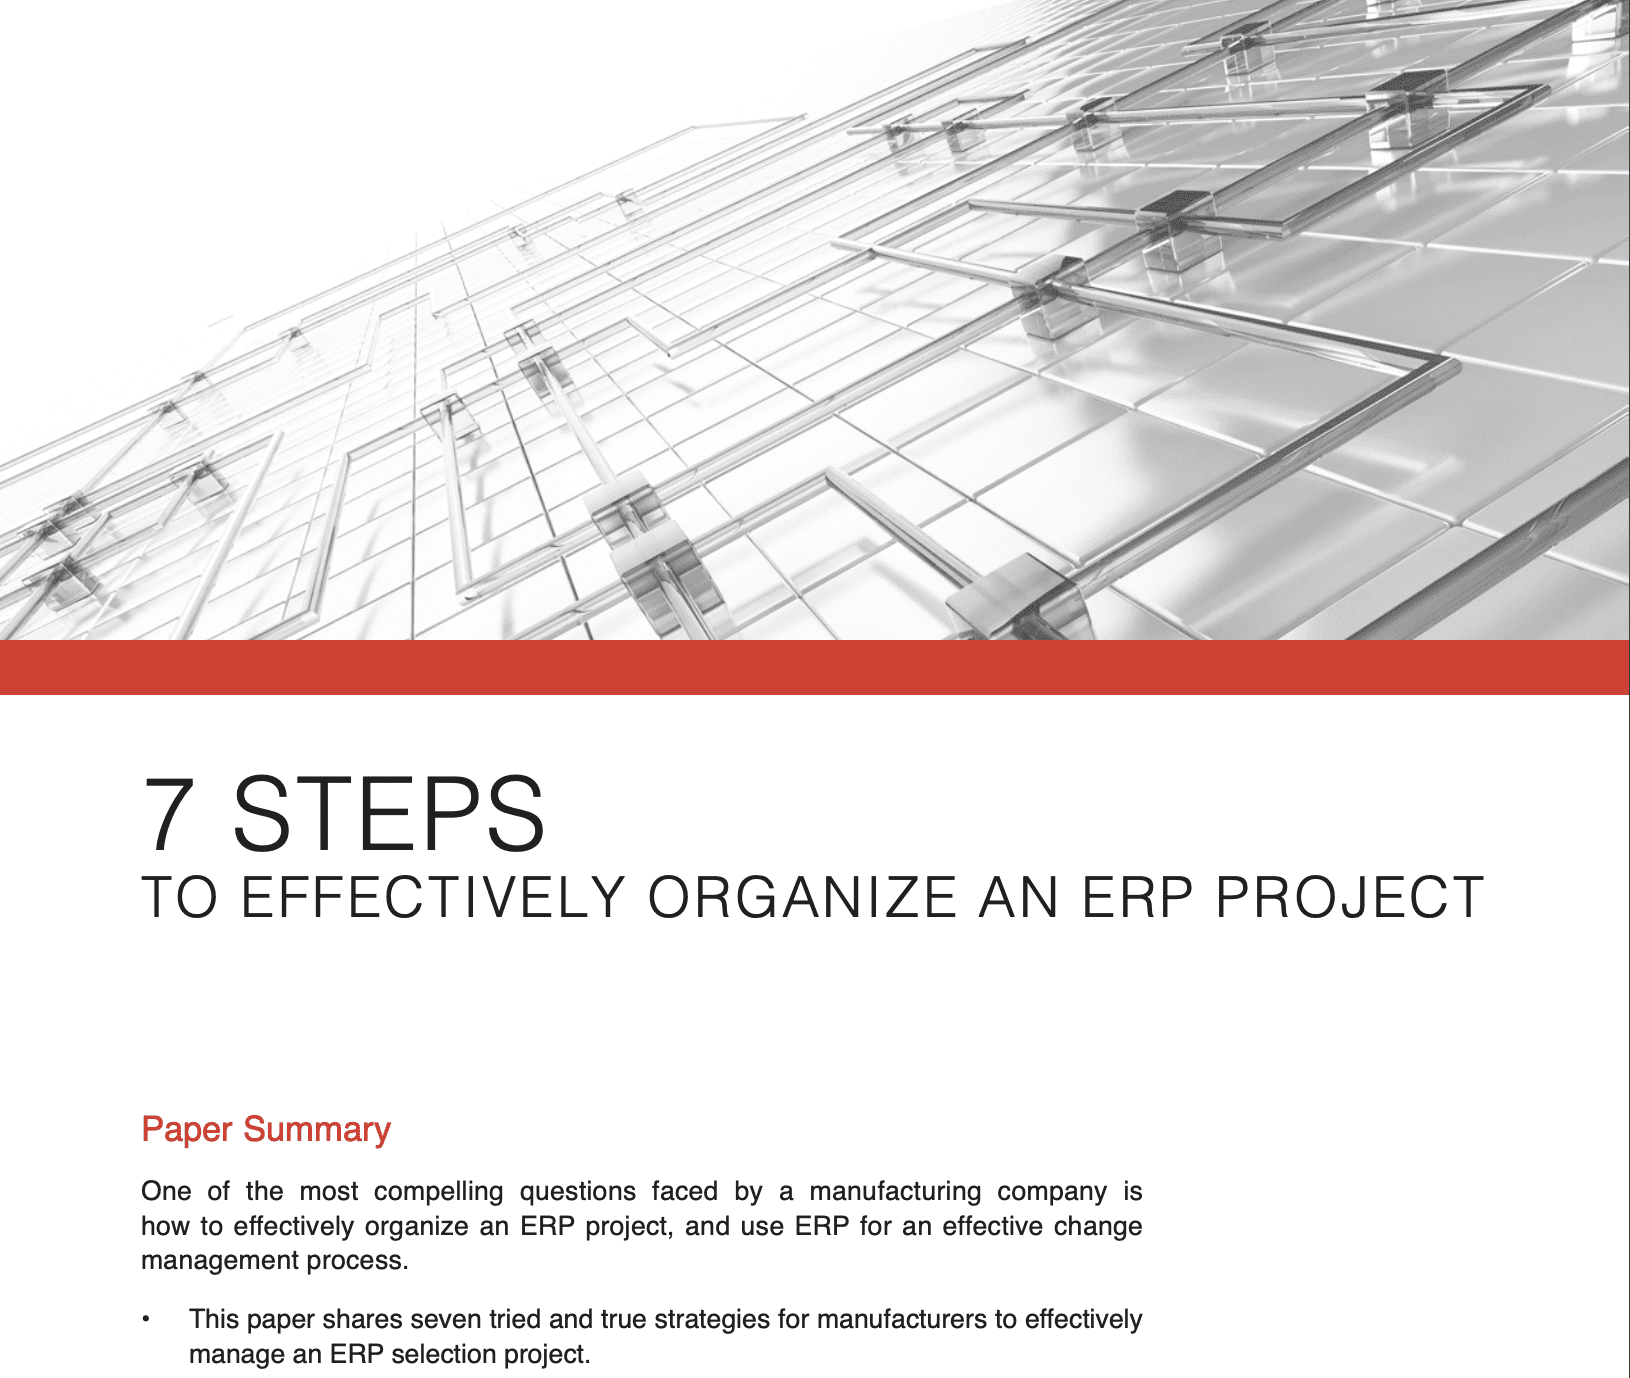 7 Steps to effectively organize an ERP project